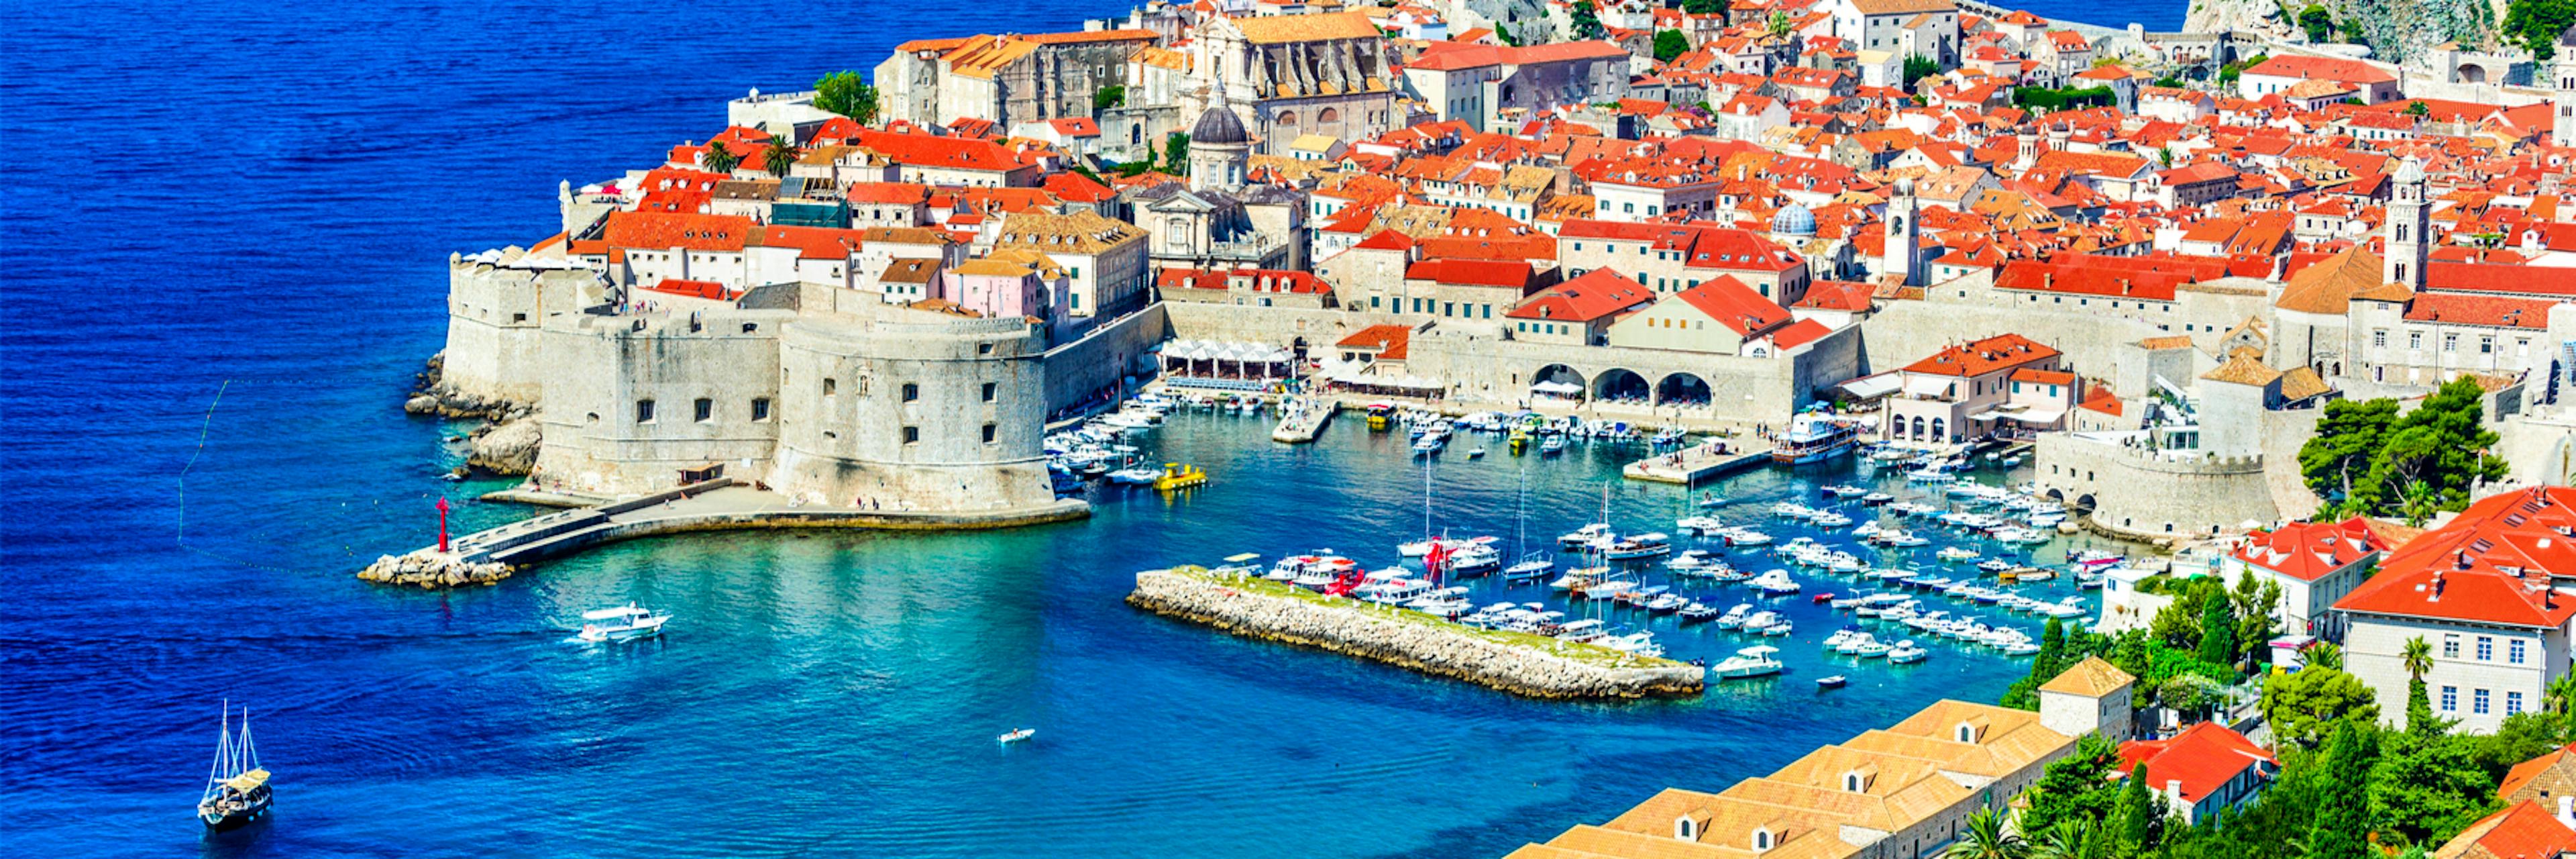 7 day itinerary - Discovering Dubrovnik Region